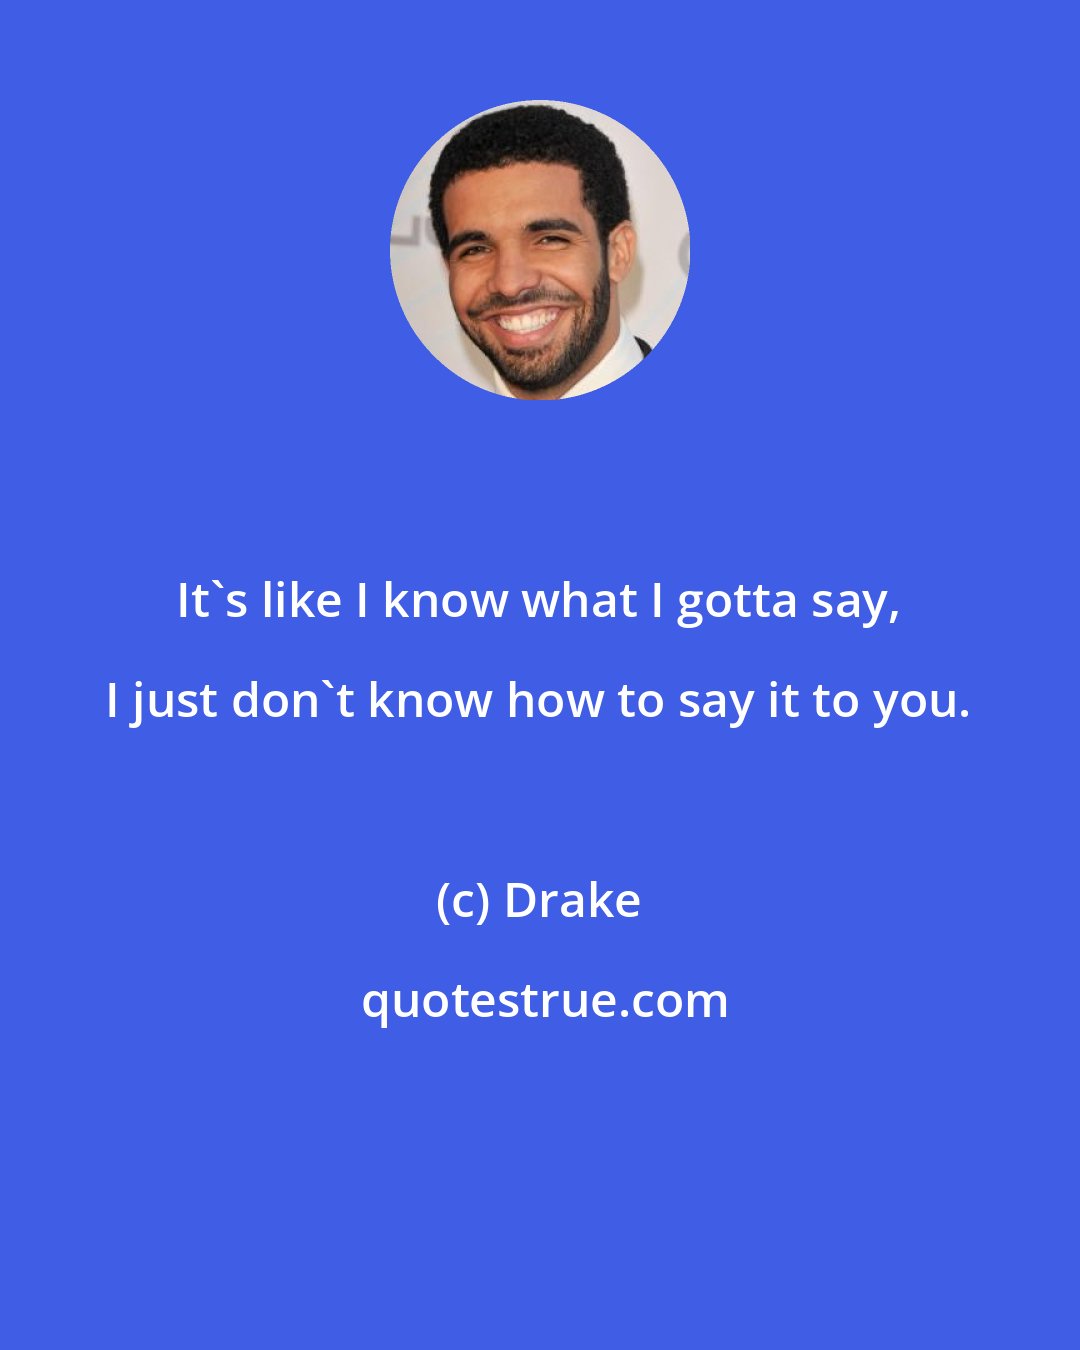 Drake: It's like I know what I gotta say, I just don't know how to say it to you.